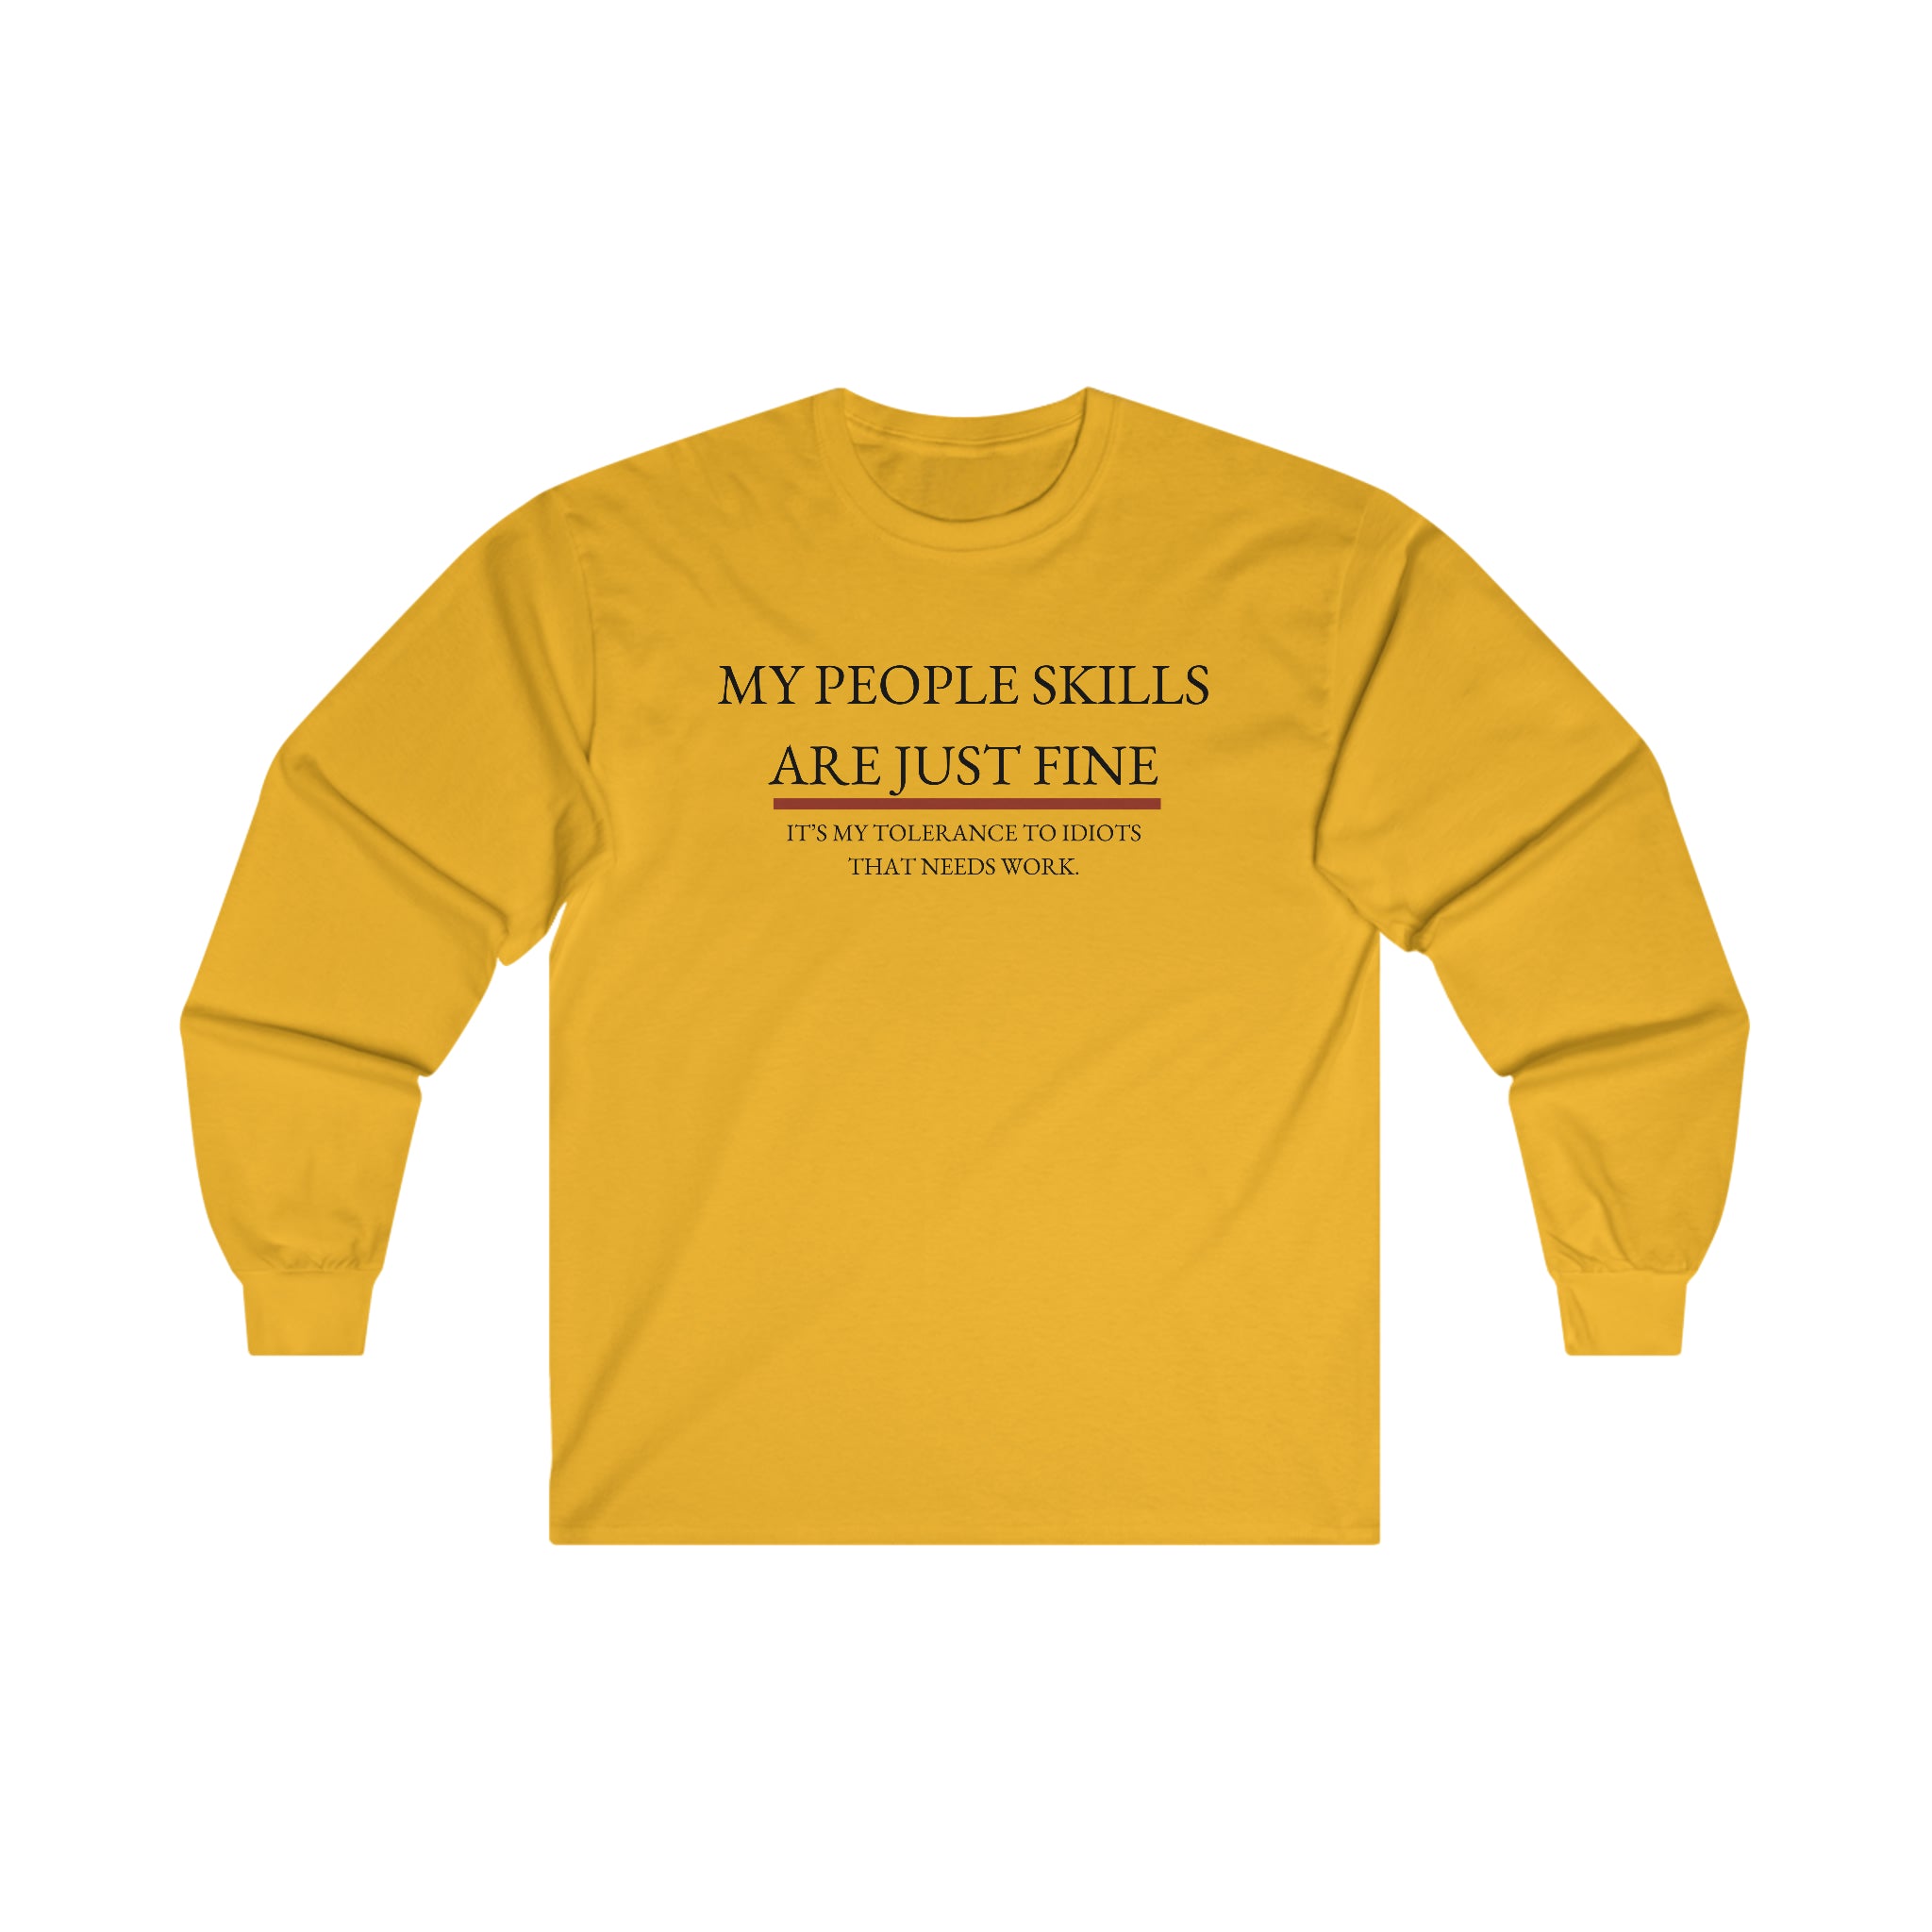 My People Skills Are Just Fine Long-Sleeve T-Shirt